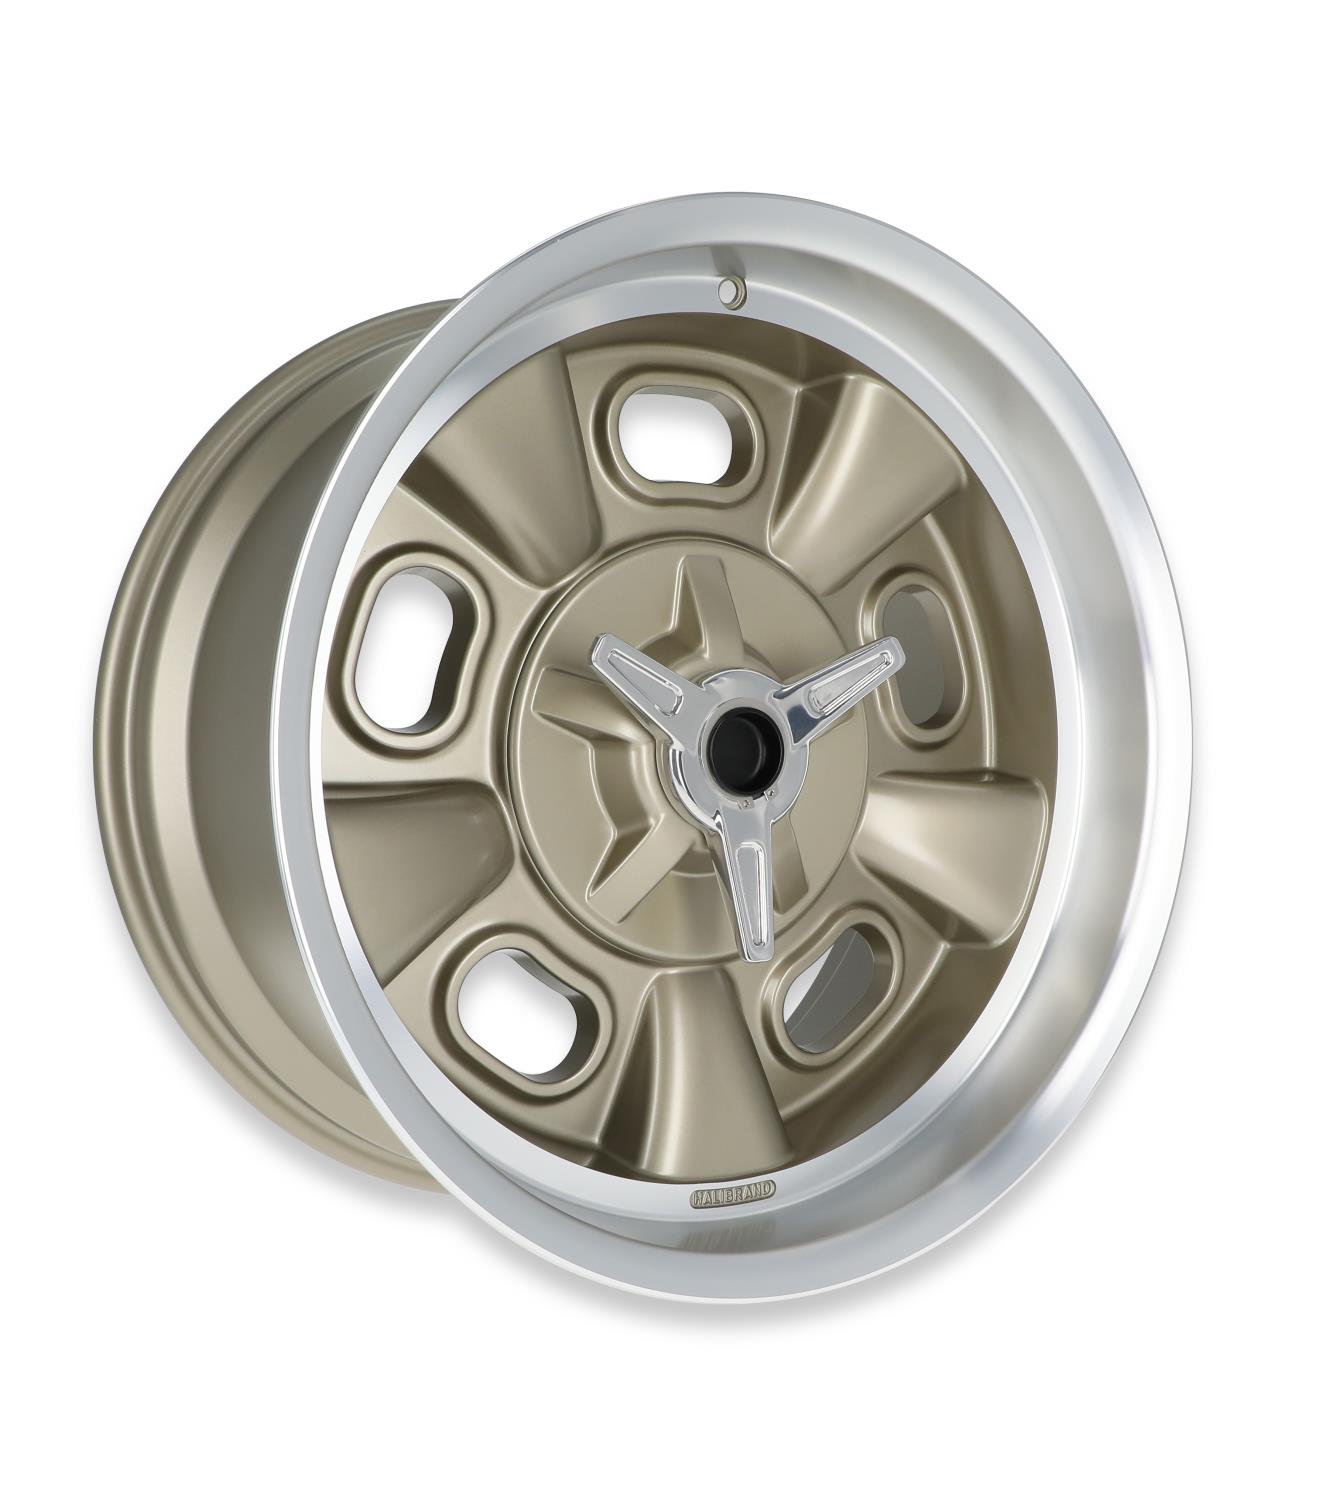 Indy Roadster Wheel, Size: 20x10", Bolt Pattern: 5x5", Backspace: 5.5" [MAG7 - Semi Gloss Clearcoat]